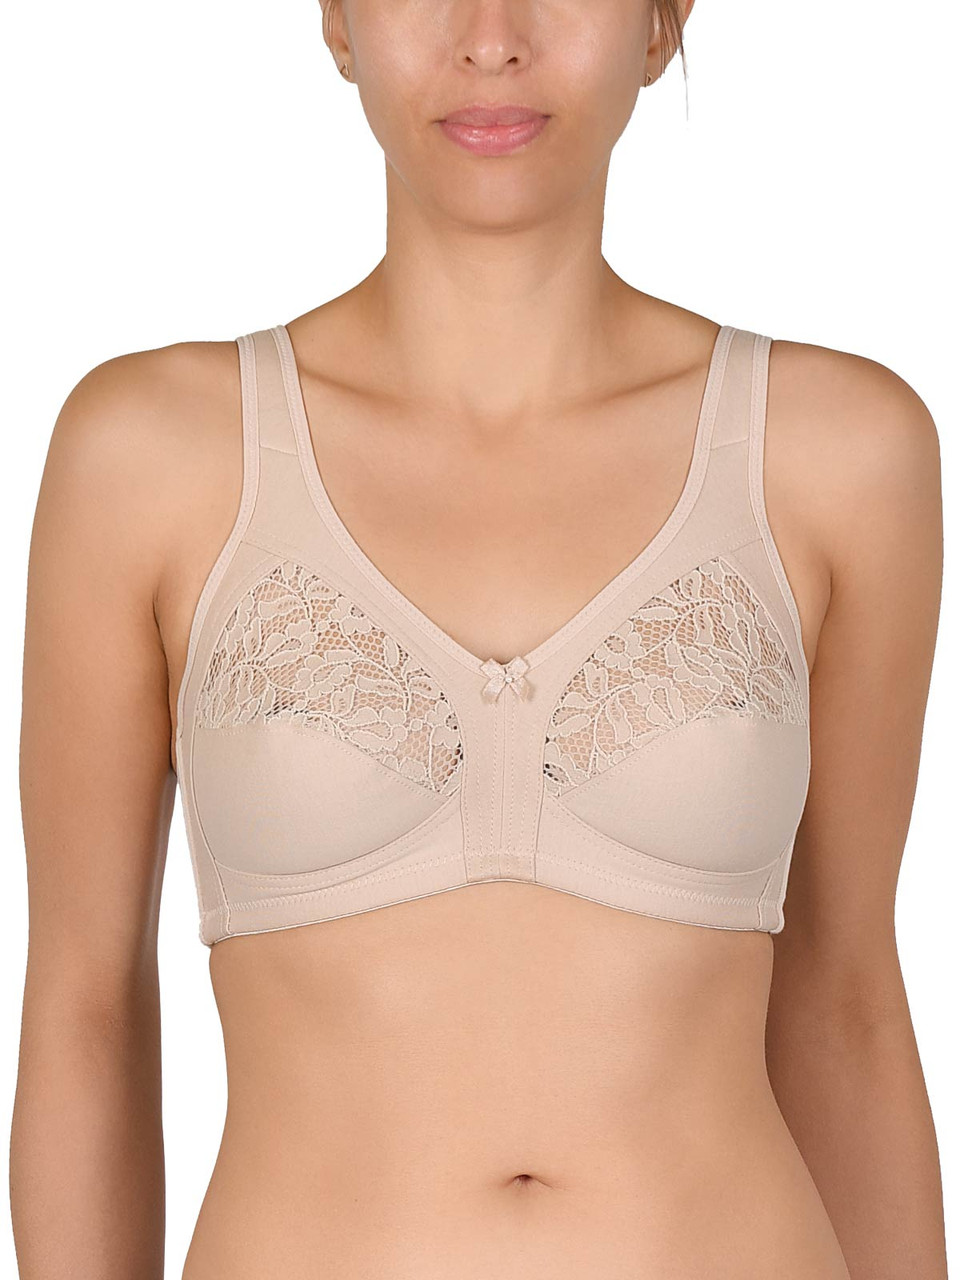 Naturana Firm Control Lace Cup 3 Seam Bra White Style 5422 — Sandras-Online